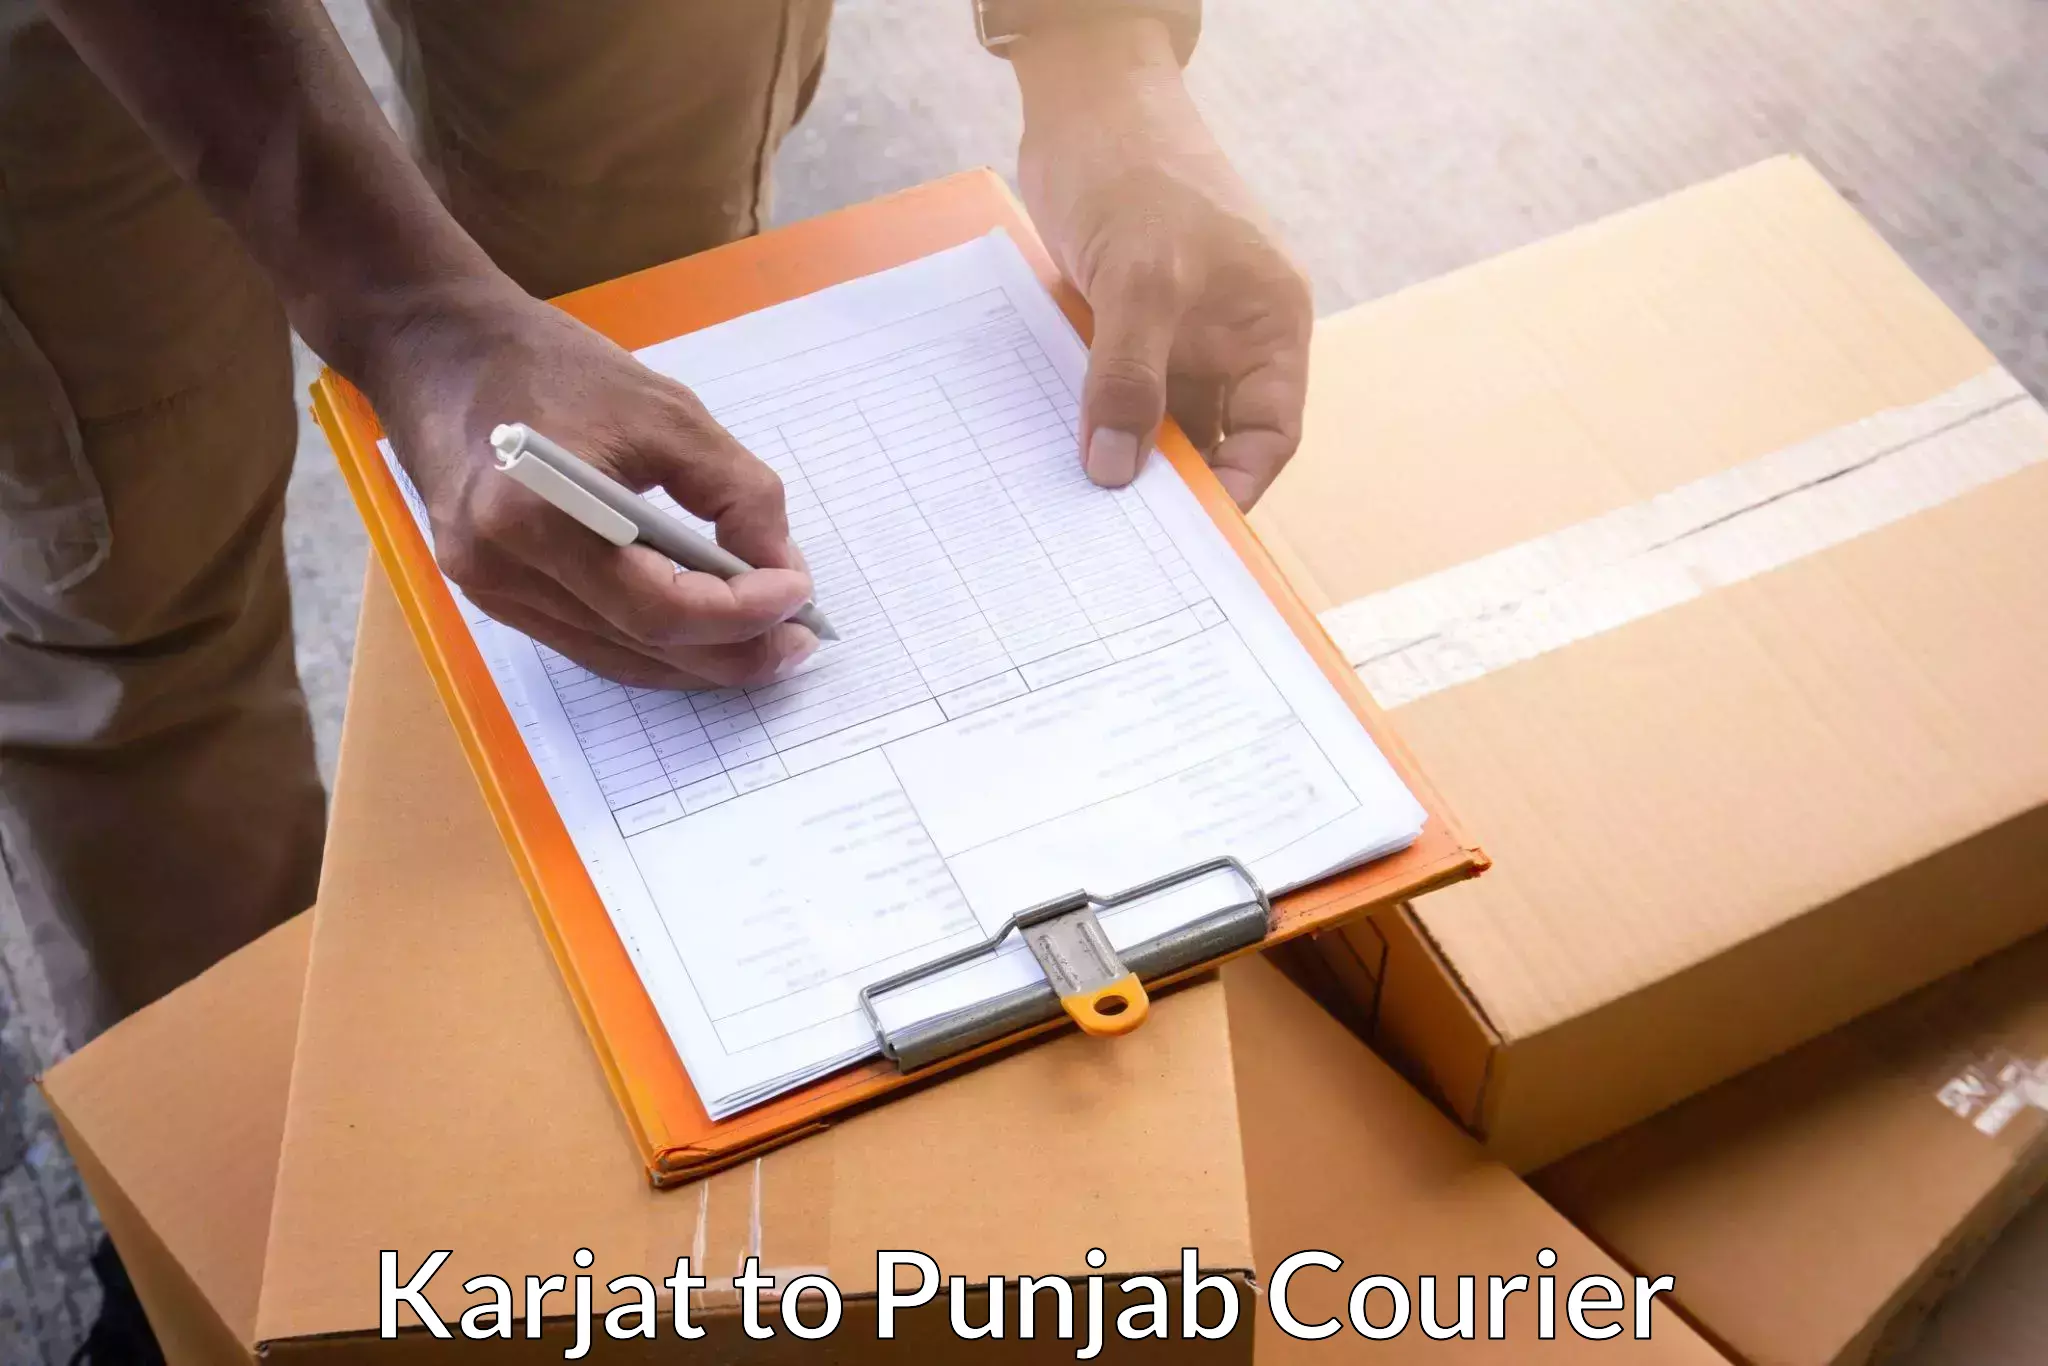 On-call courier service Karjat to Mohali